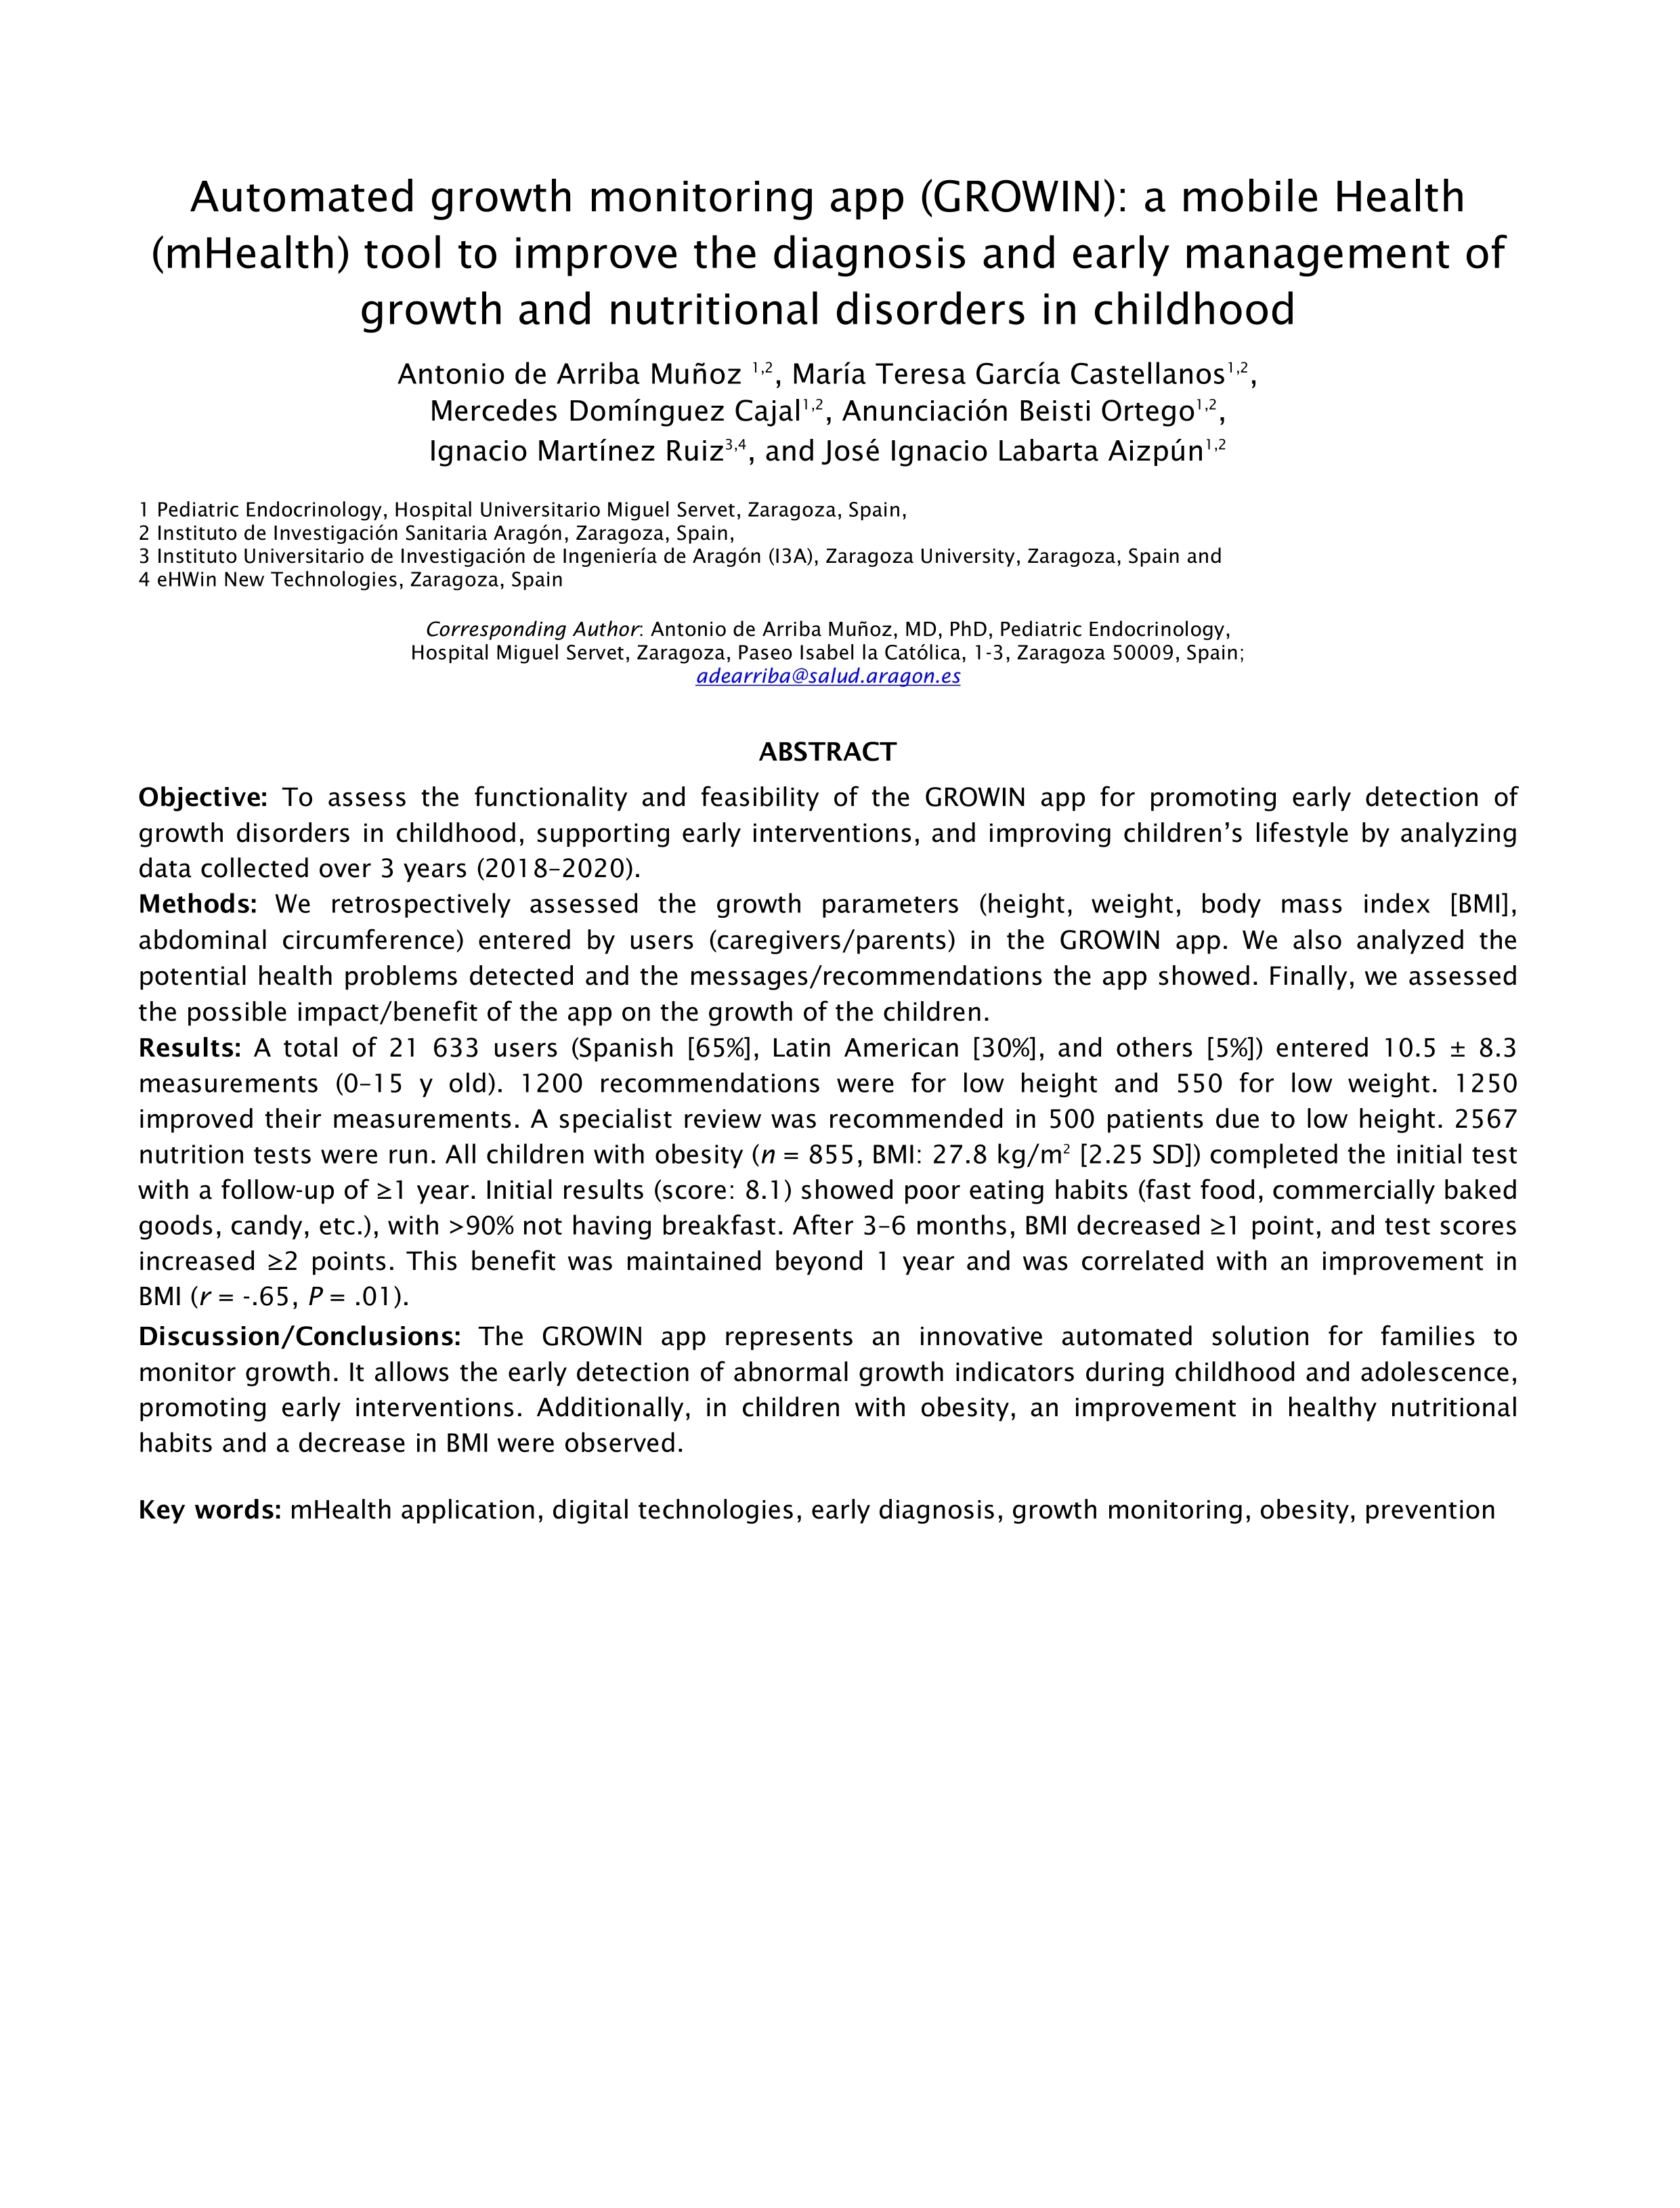 Automated growth monitoring app (GROWIN): a mobile Health (mHealth) tool to improve the diagnosis and early management of growth and nutritional disorders in childhood